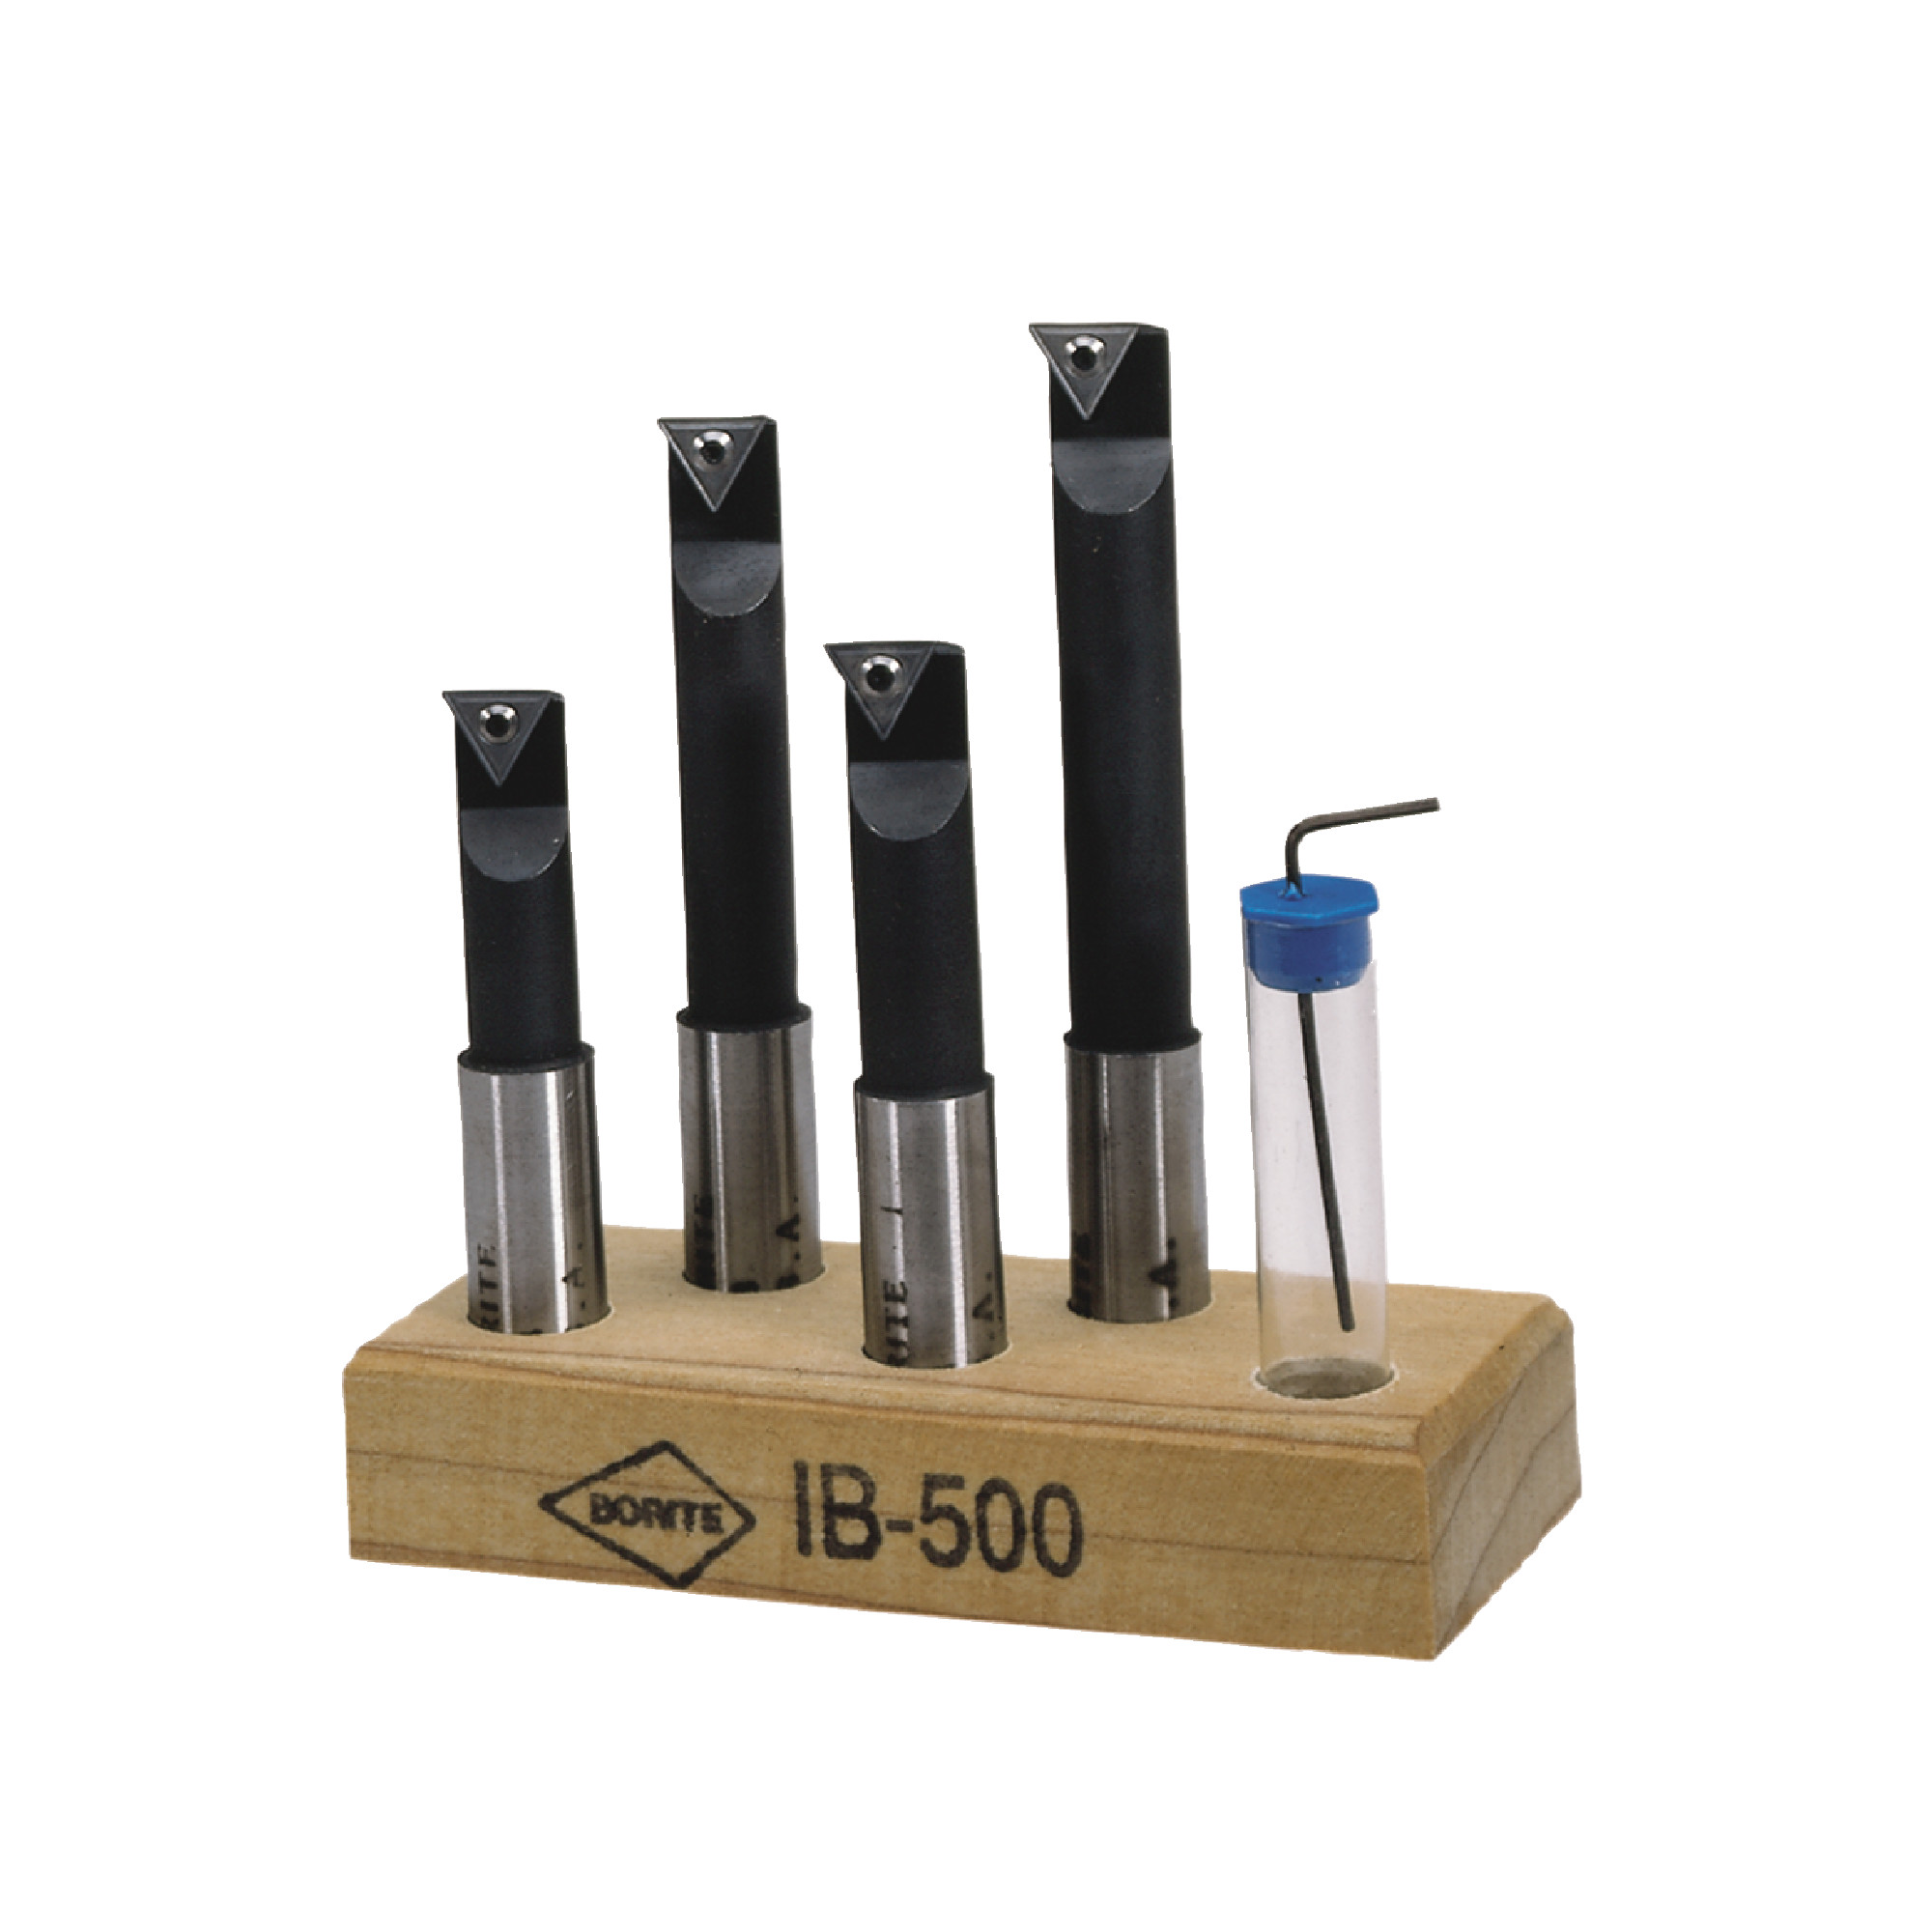 BORITE - IB-500 SET Steel / Boring Bar Set with 4 Different 1/2" With BTT-221 C5 Uncoated Inserts / Right Hand